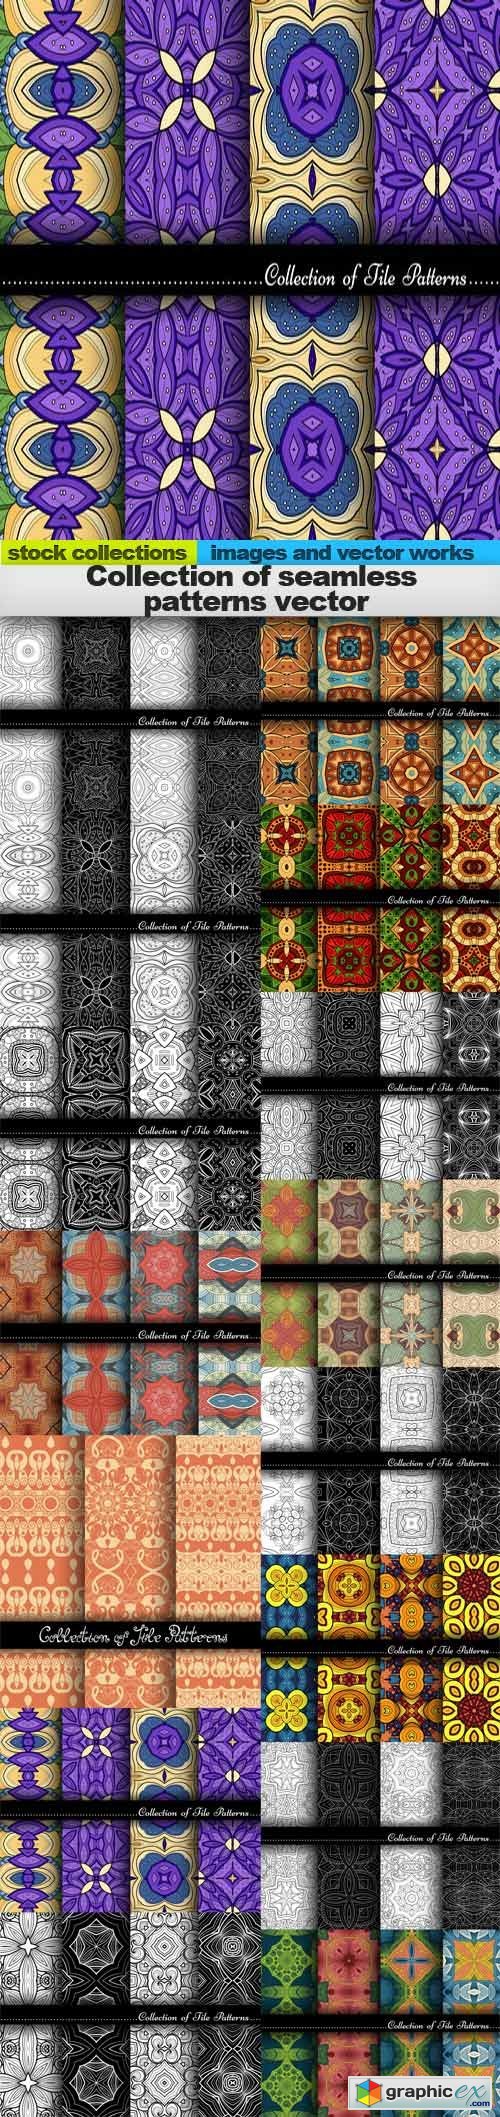 Collection of seamless patterns vector, 15 x EPS